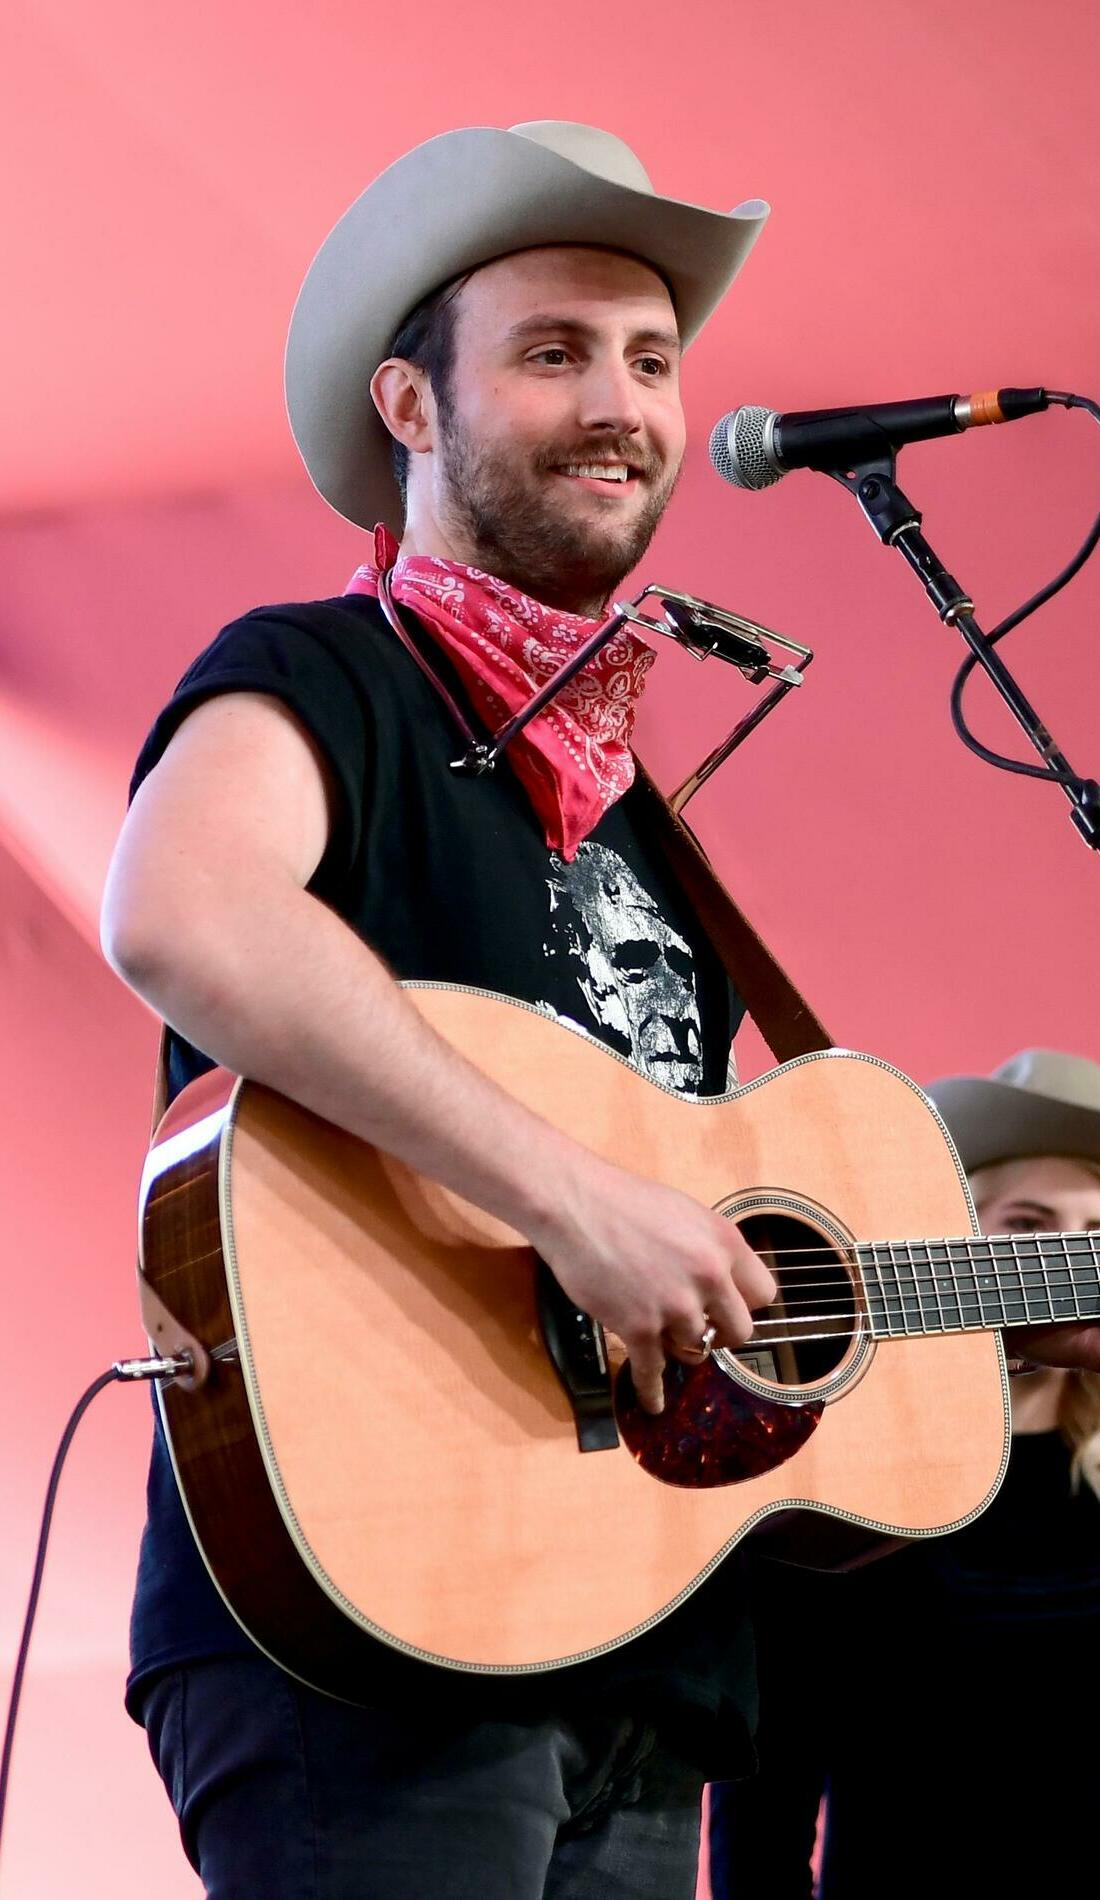 A Ruston Kelly live event